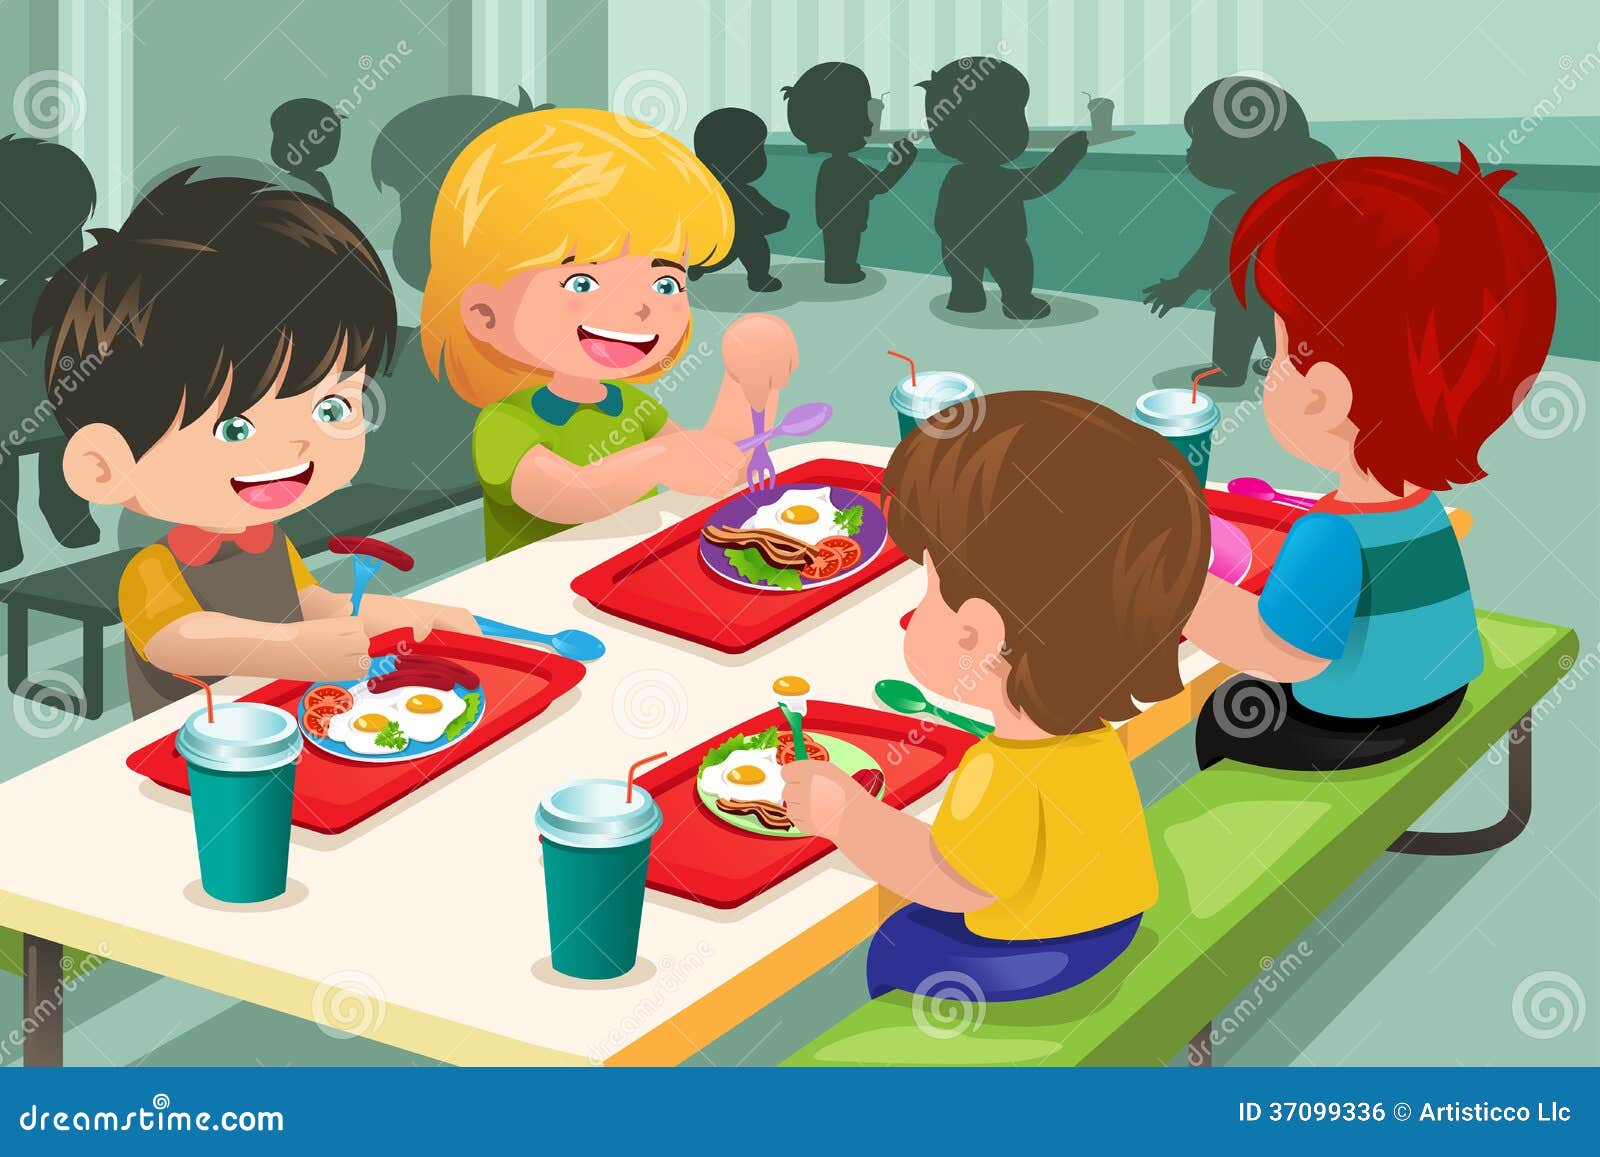 clipart school lunch - photo #36